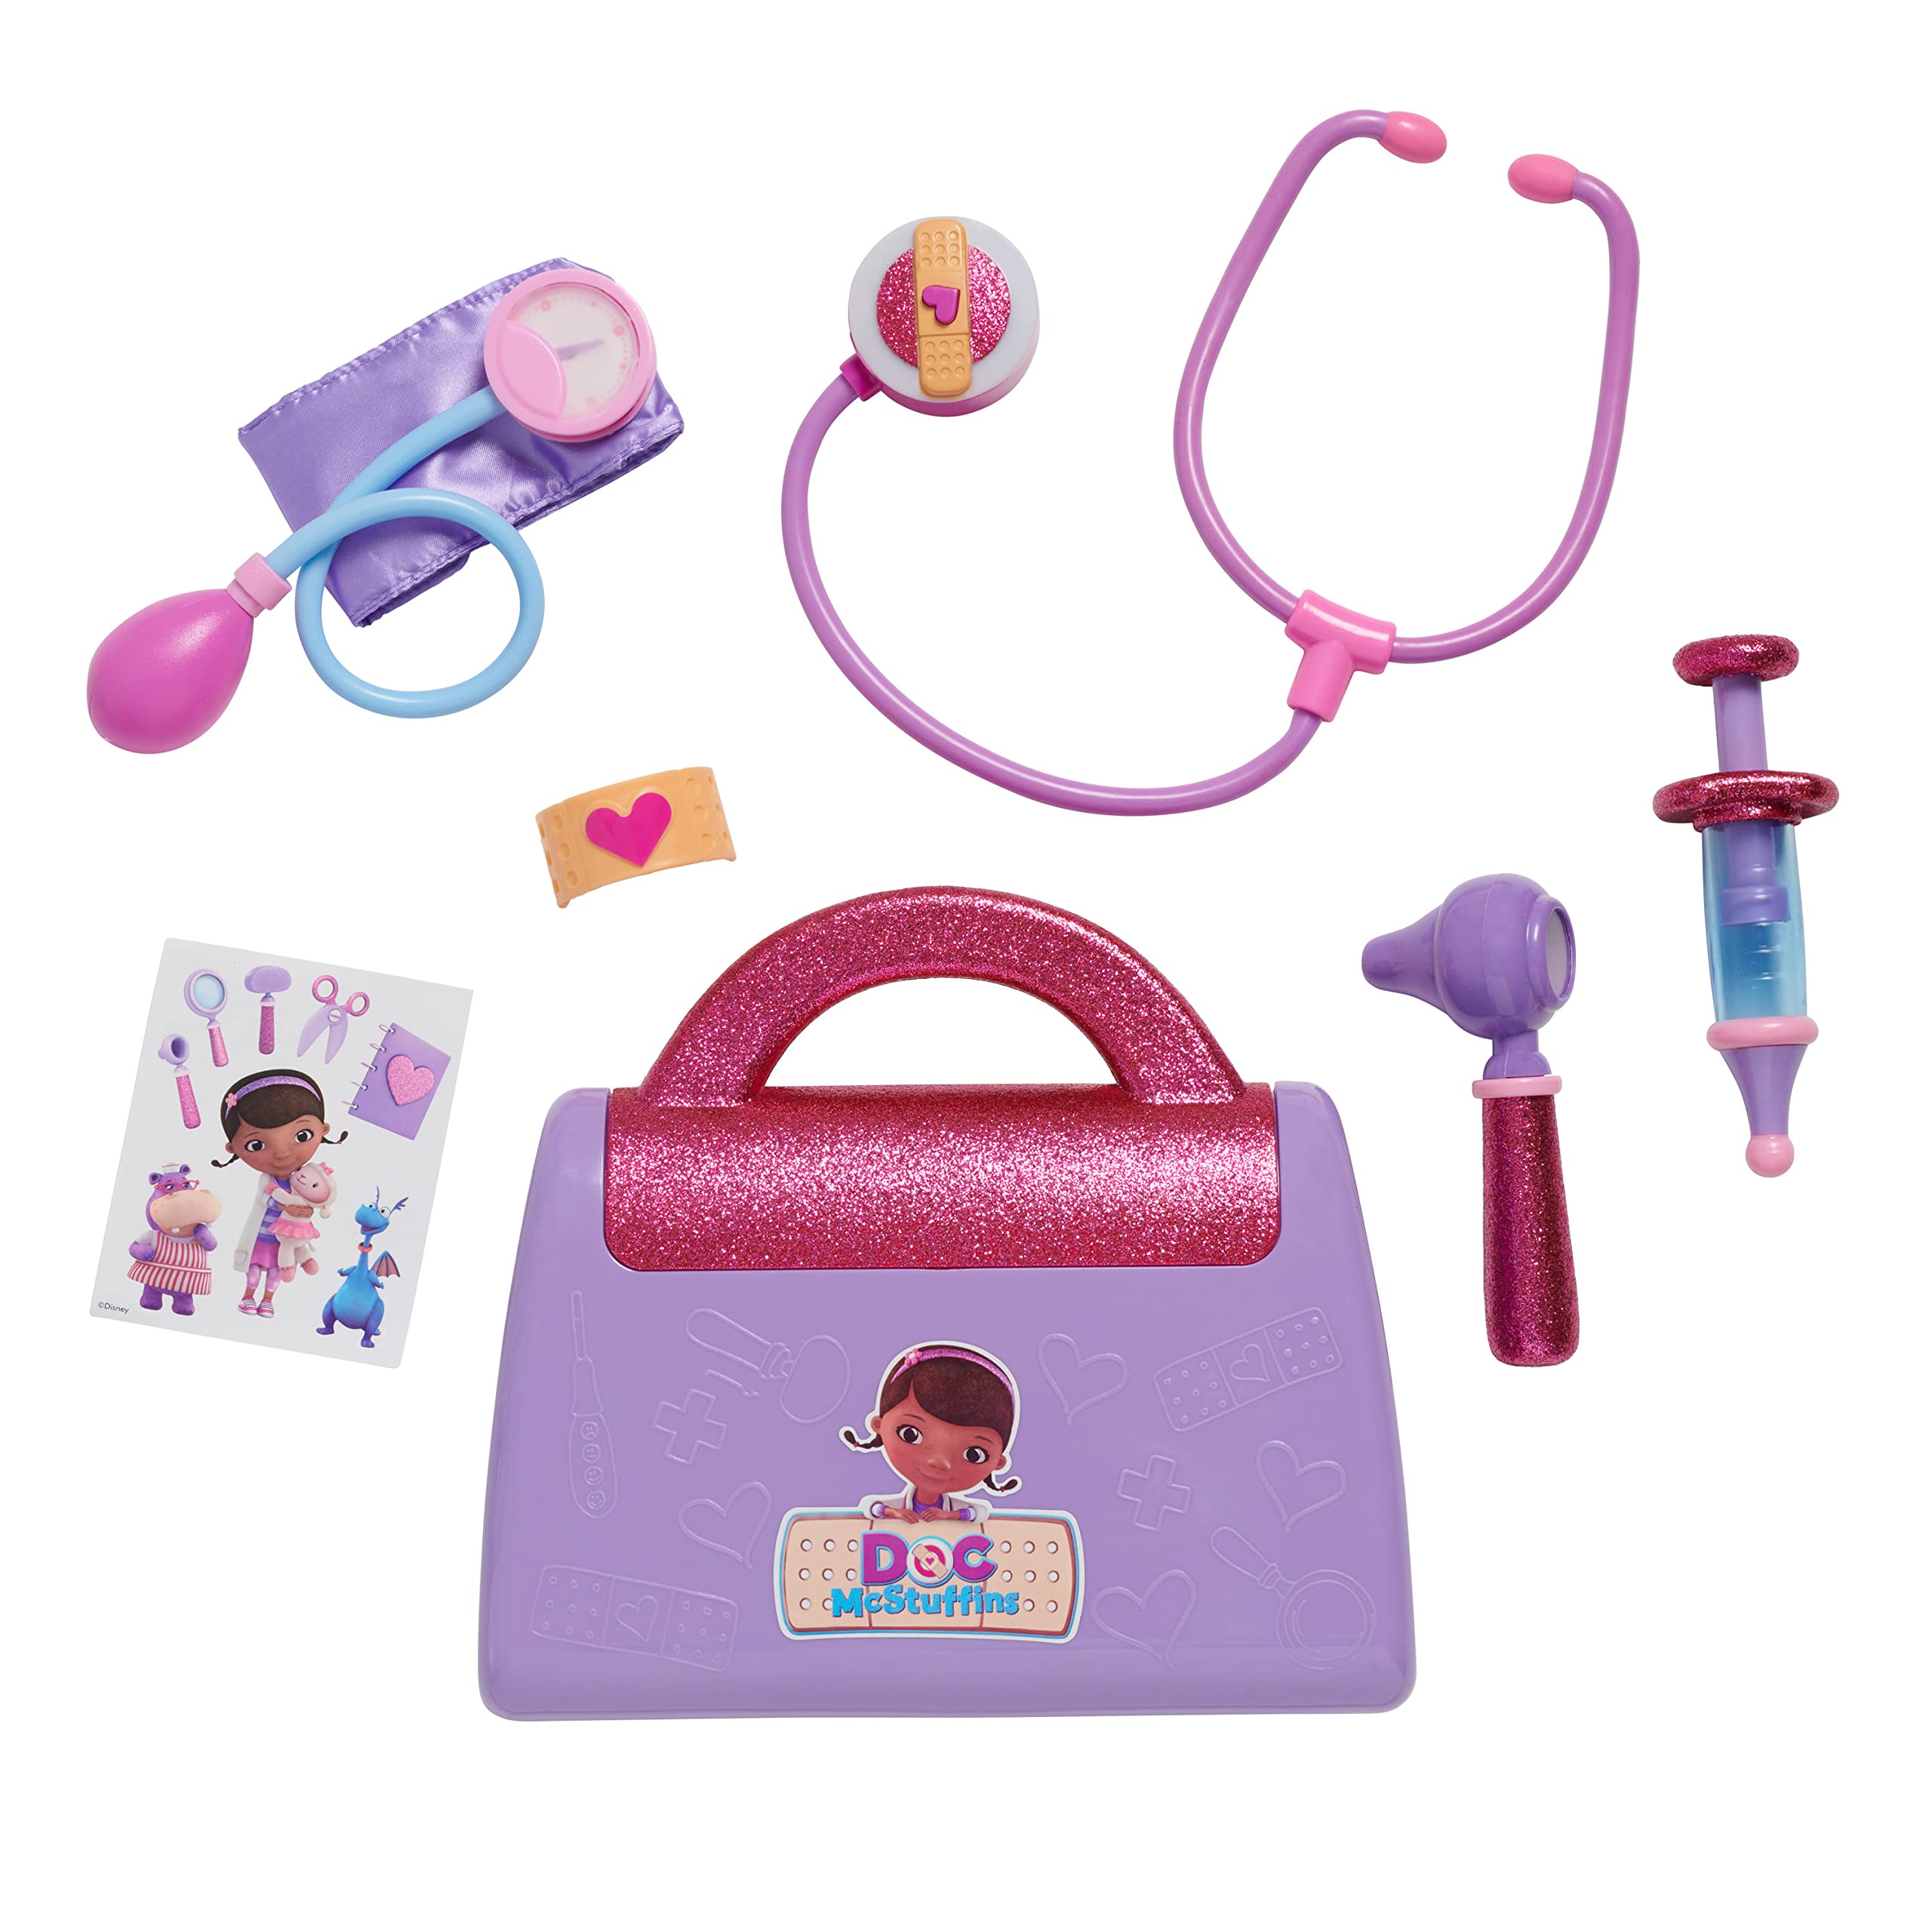 Disney Junior Doc McStuffins Doctor's Bag Set, Officially Licensed Kids Toys for Ages 3 Up, Gifts and Presents, Amazon Exclusive